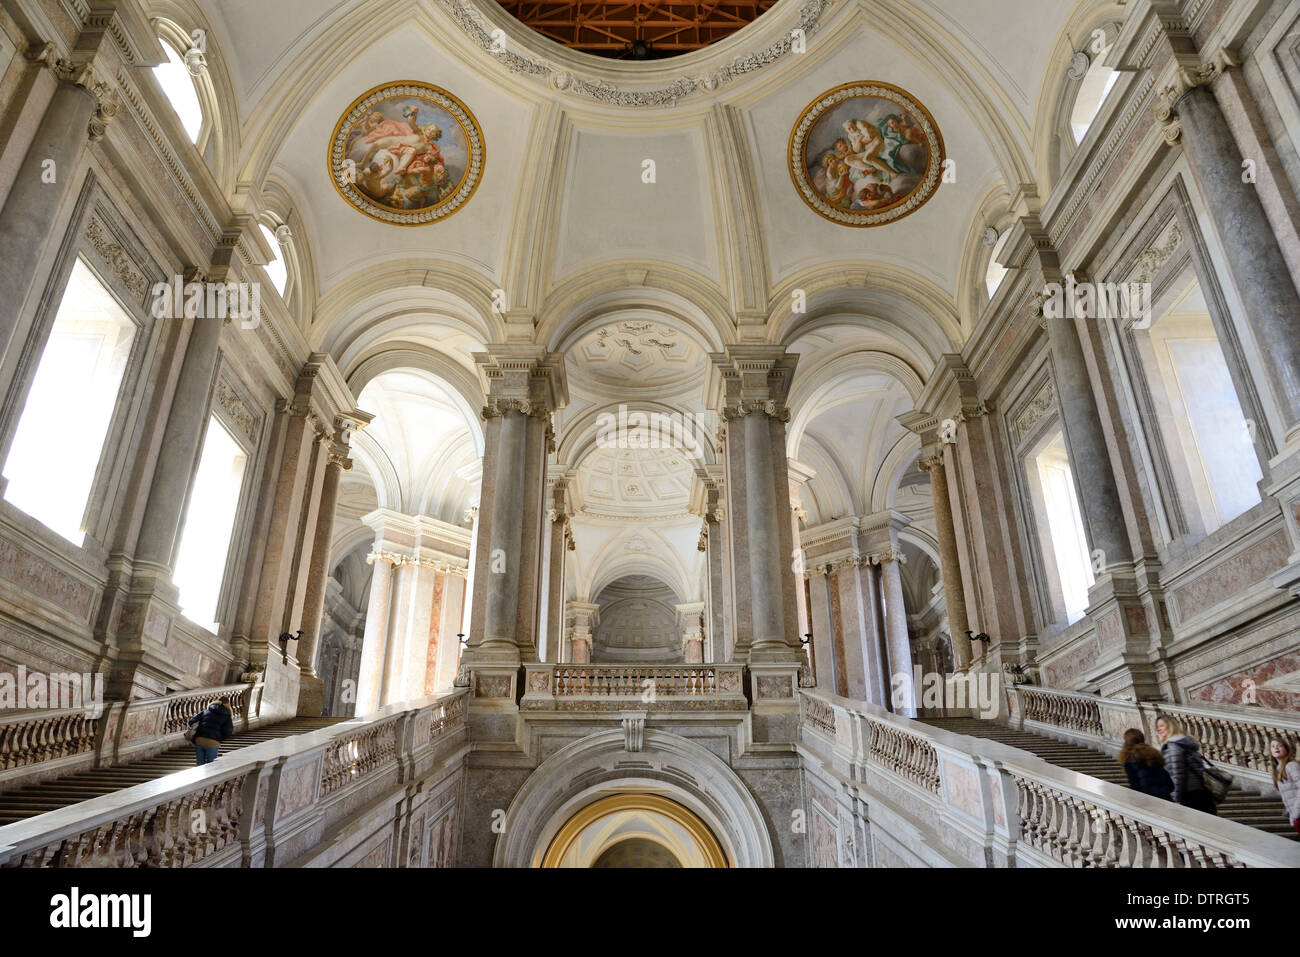 CASERTA, ITALY- FEBRUARY 16: Caserta Royal Palace called the little Versailles has been featured in the Star Wars movie. Stock Photo